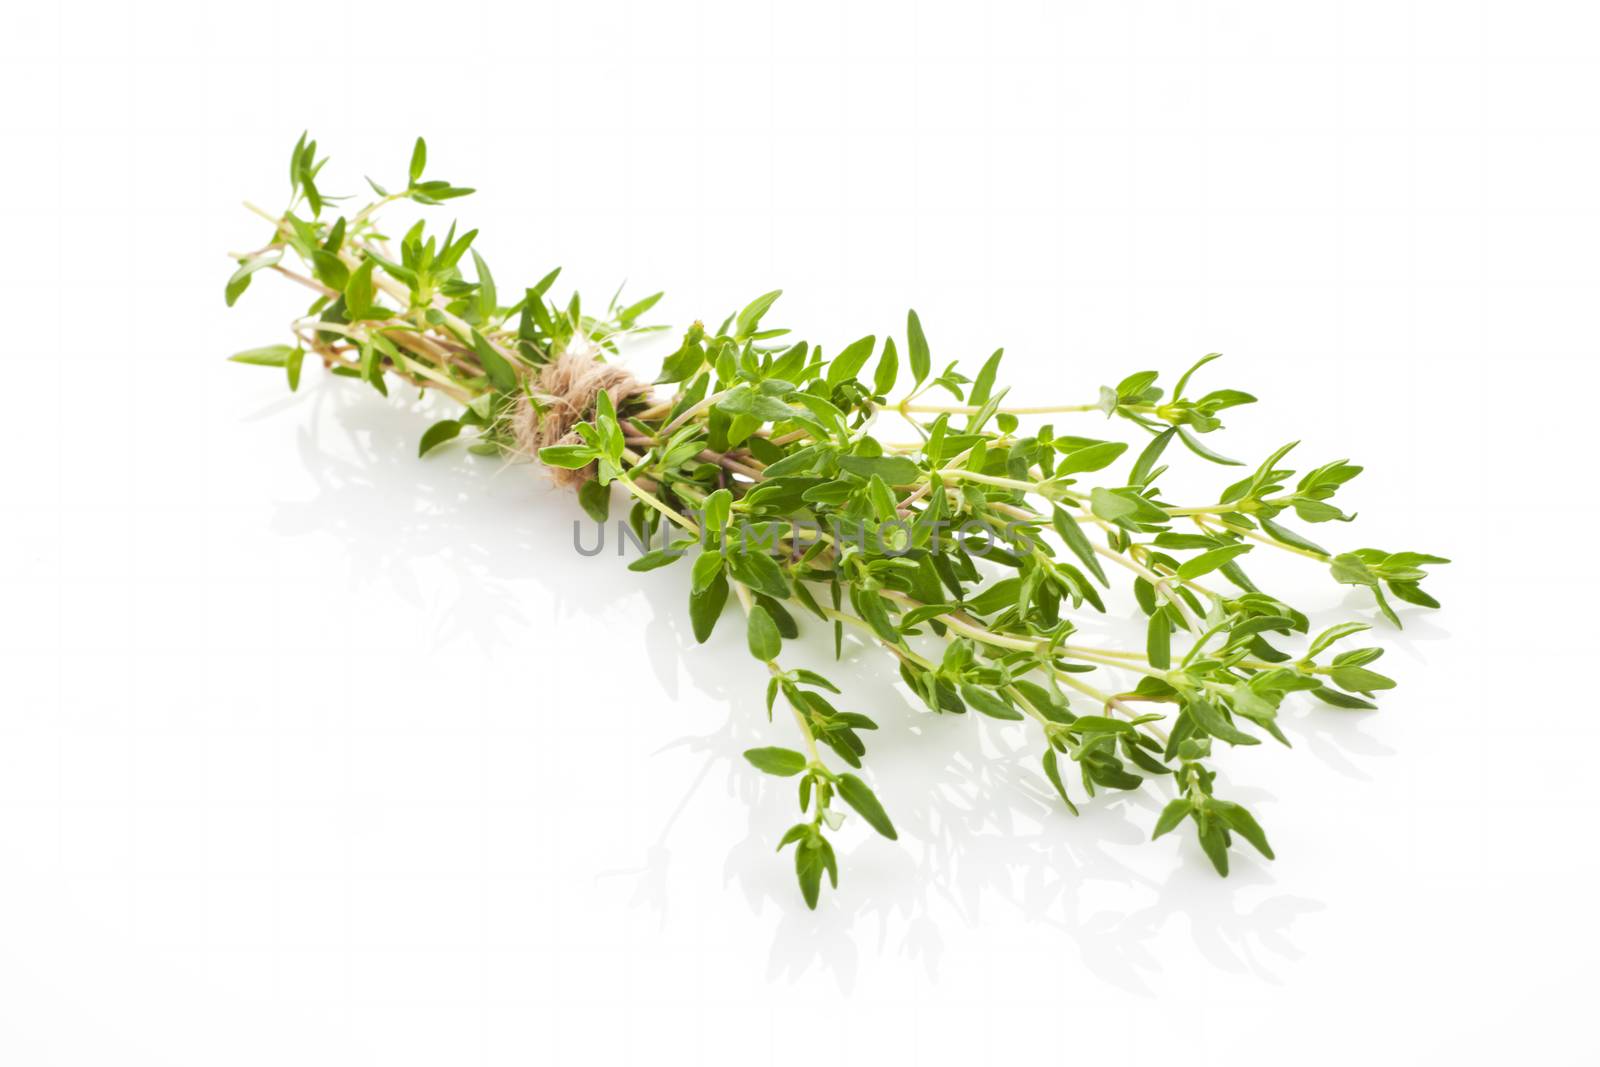 Organic fresh thyme bunch bound with brown natural twine isolated on white background. Aromatic culinary herbs.